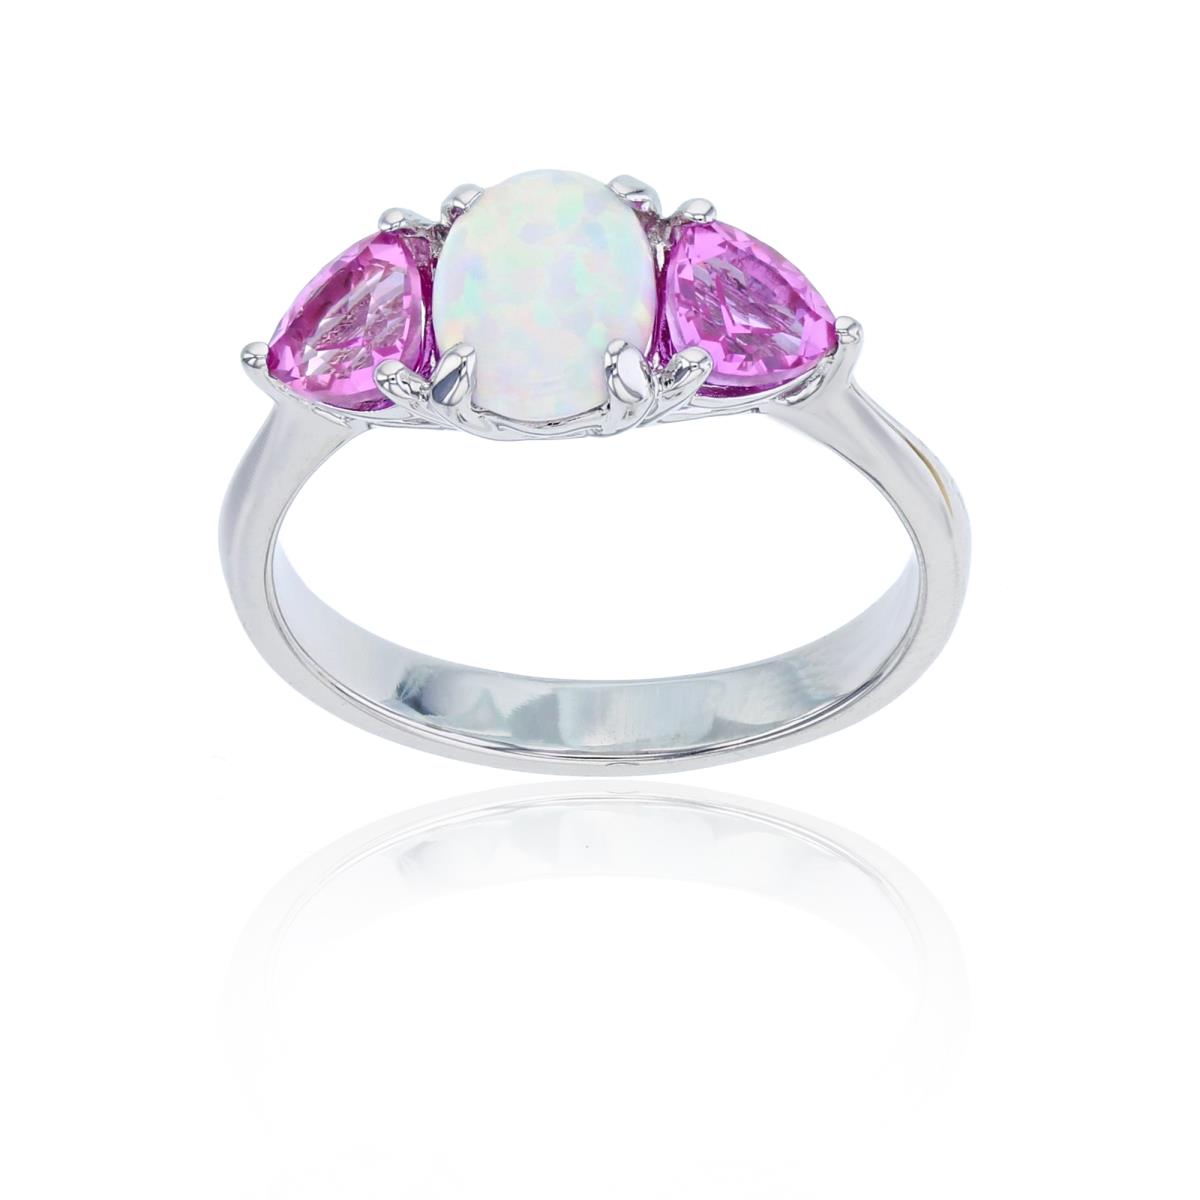  14K White Gold 8x6mm Ov Opal & 5mm Trill Pure Pink Ring